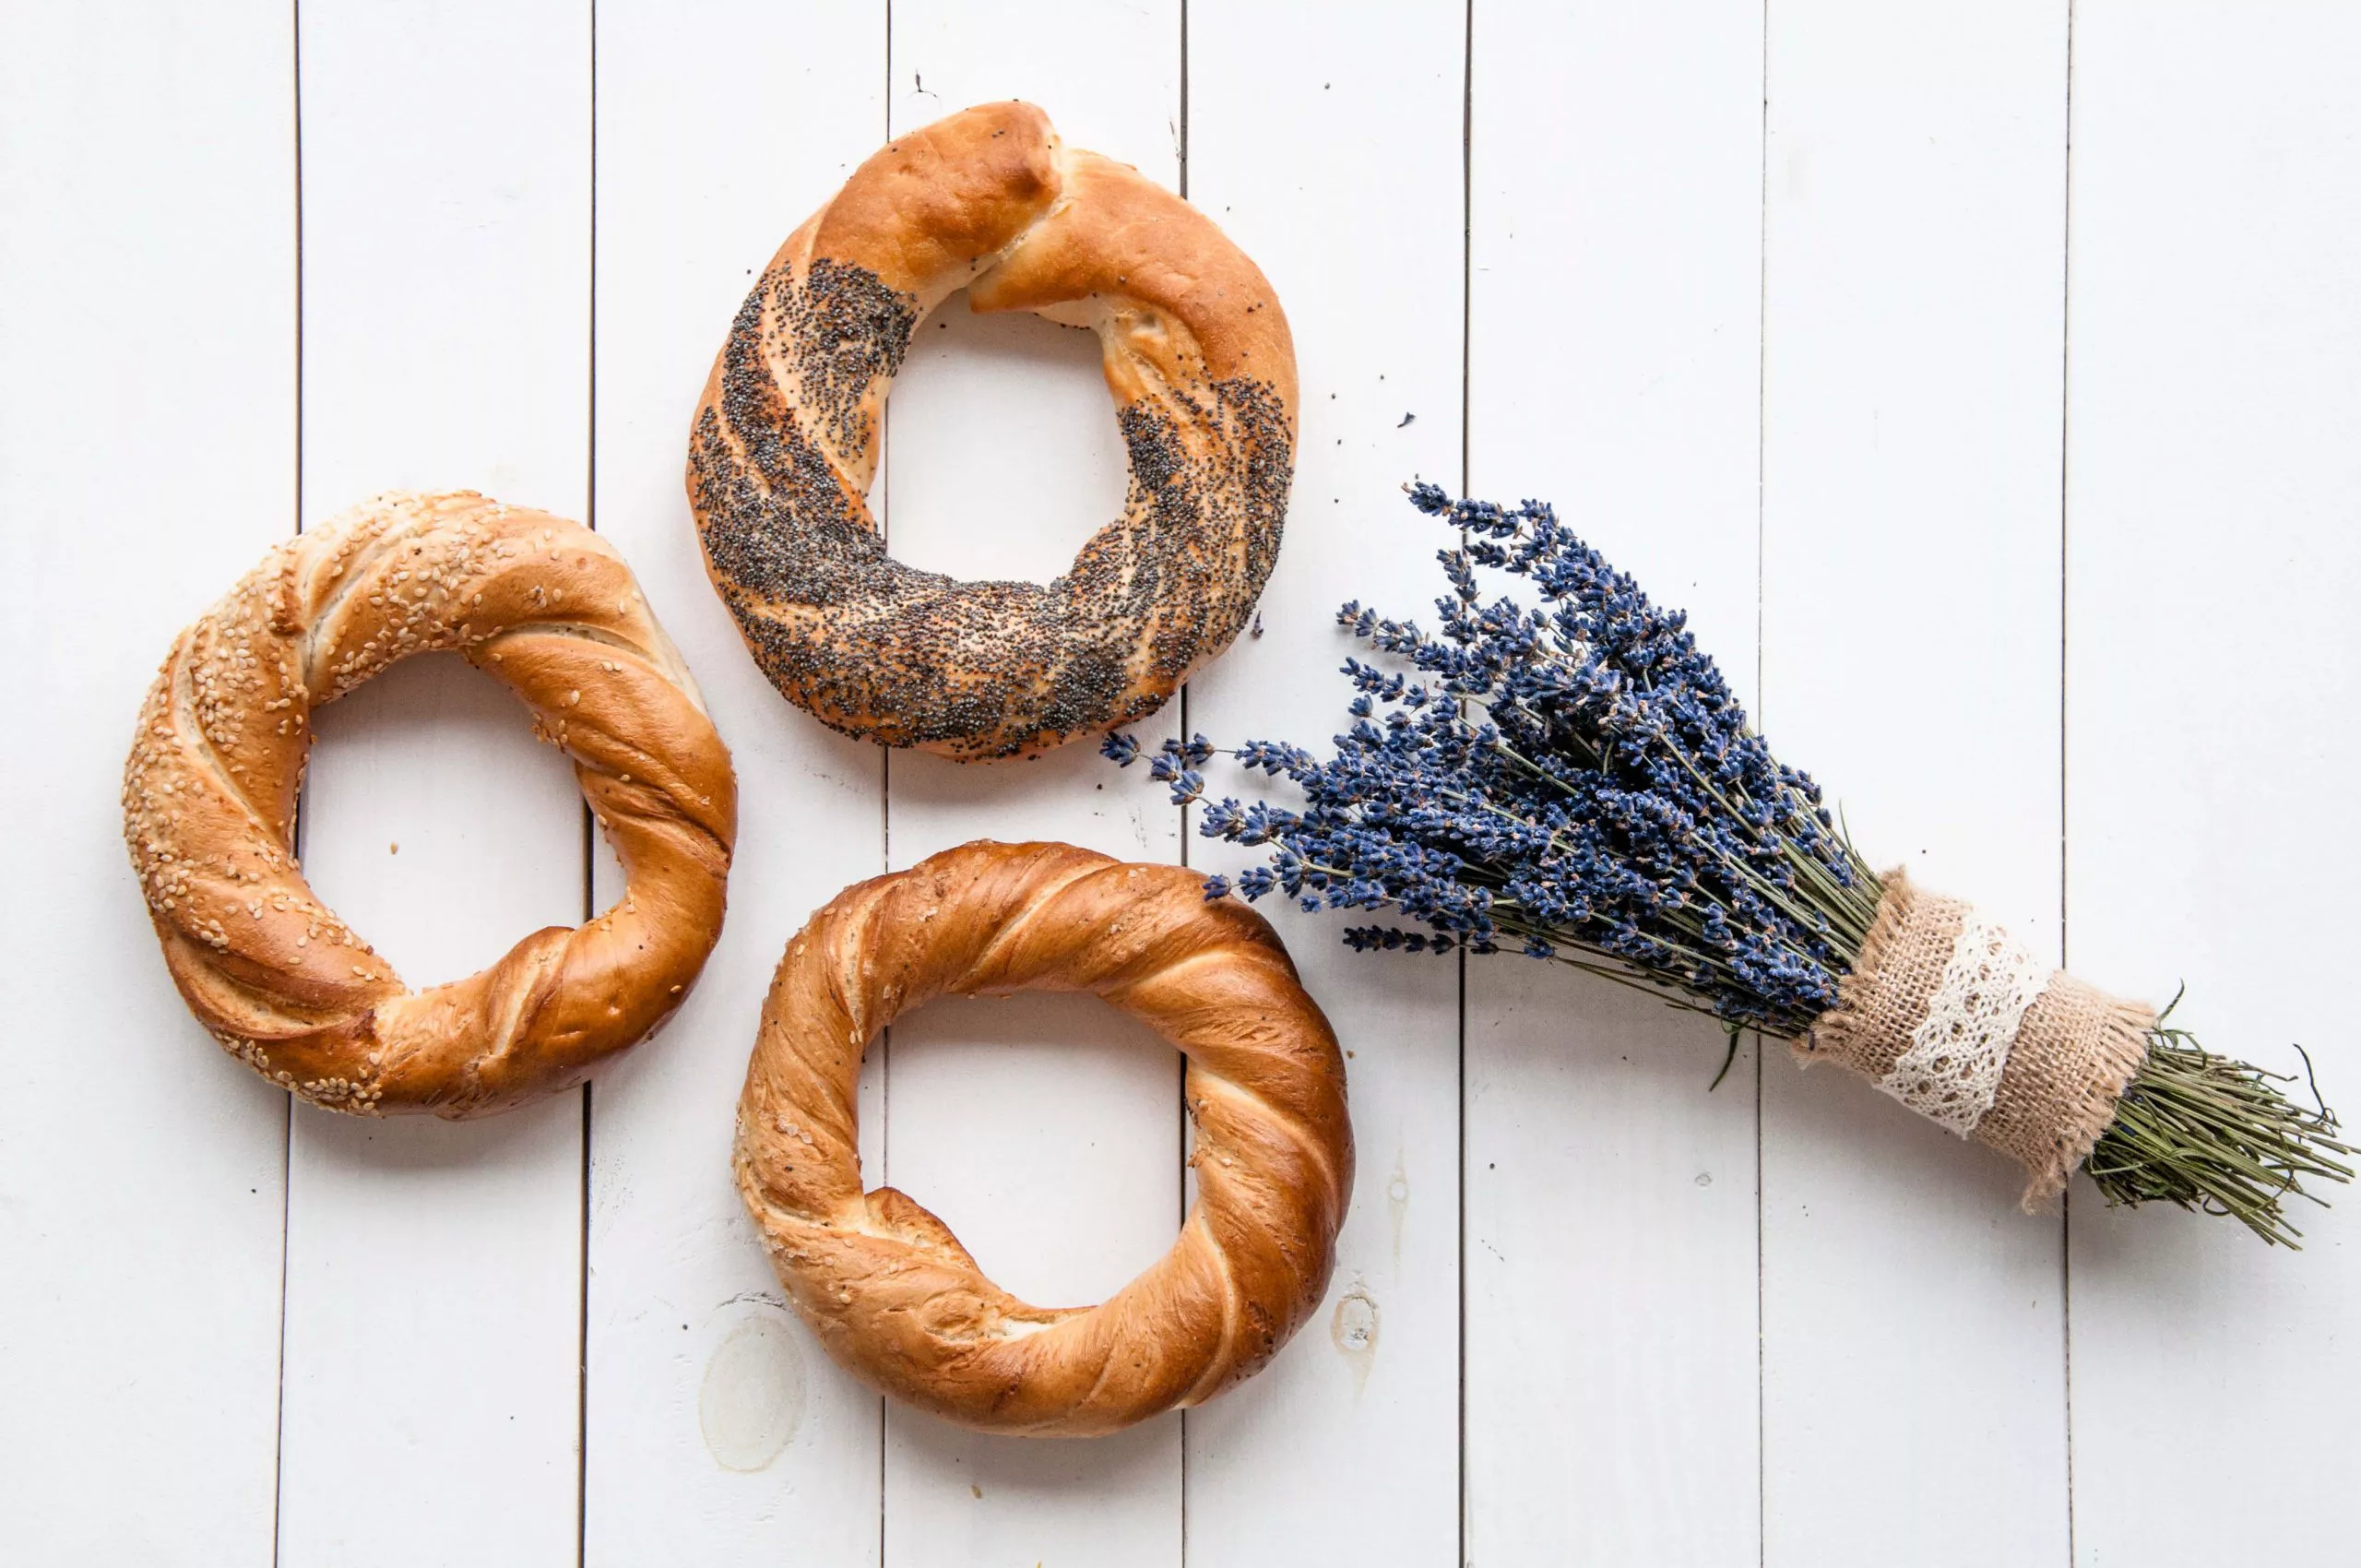 Three obwarzanki bread rings, the left one sprinkled with salt, the top one – with poppyseed, and the bottom one – with sesame, are arranged on white boards, with a rustic bouquet of tiny blue flowers on the right.